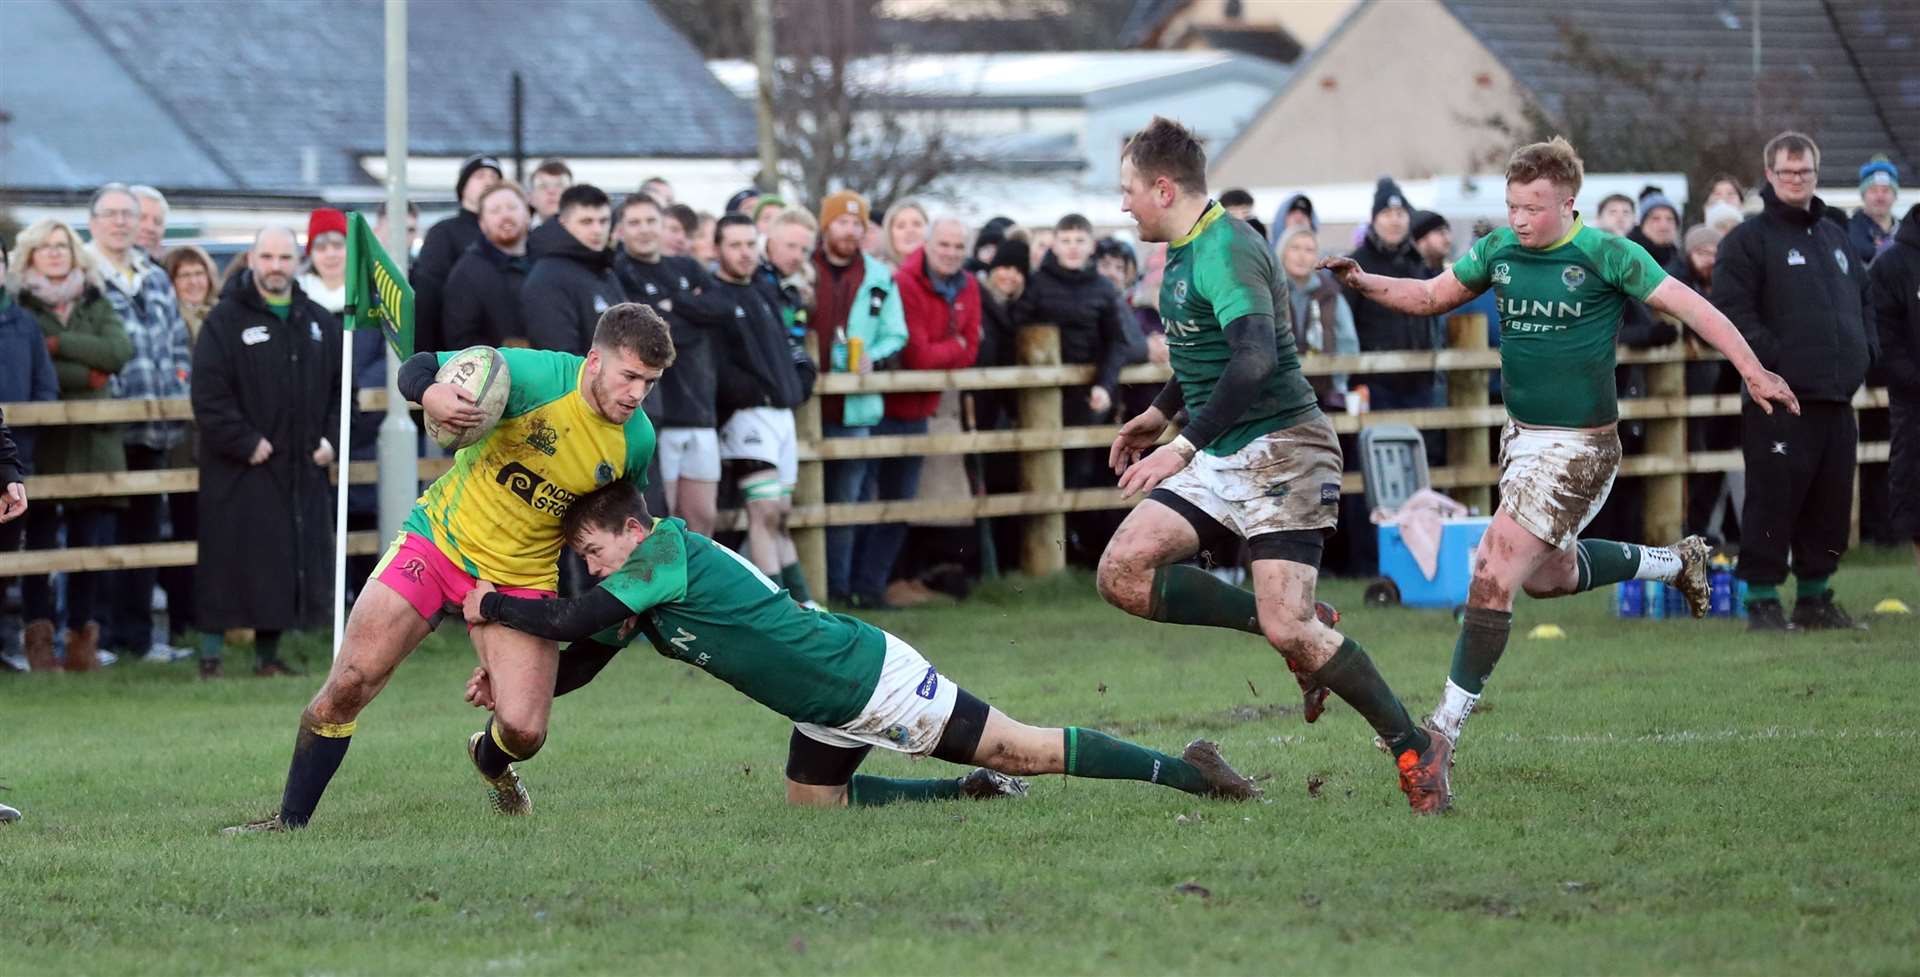 The Greens were beaten 31-5 by the Exiles in the traditional Boxing Day clash at Millbank. Here, Scott Webster tackles Stuart Kirk. Picture: James Gunn